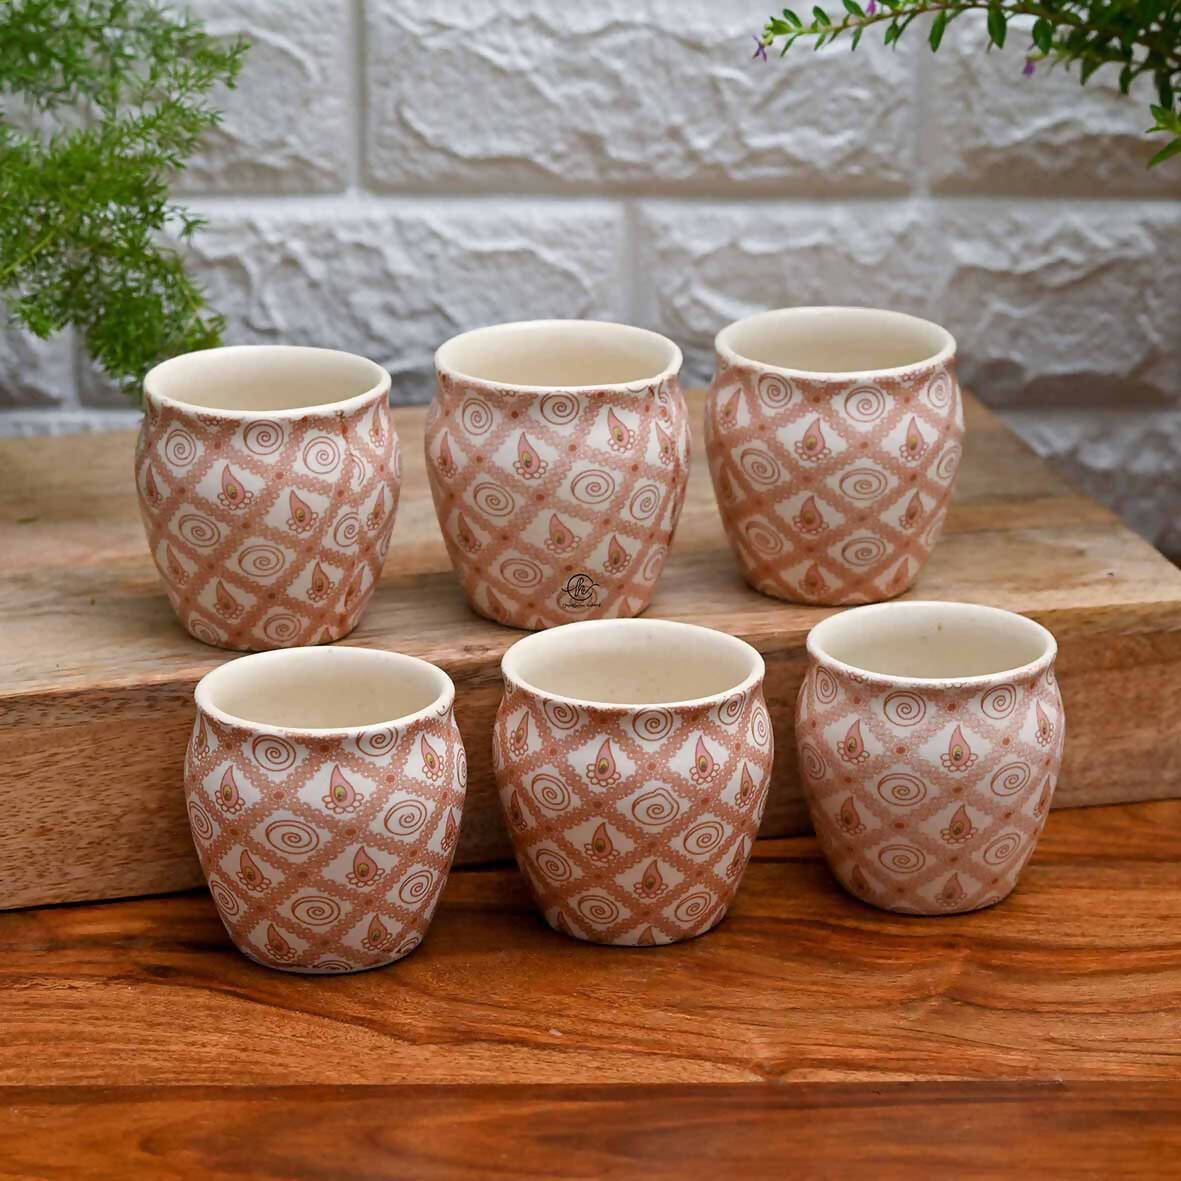 The Vivid Concurd Handmade Kulhad Cups - Dining & Kitchen - 1